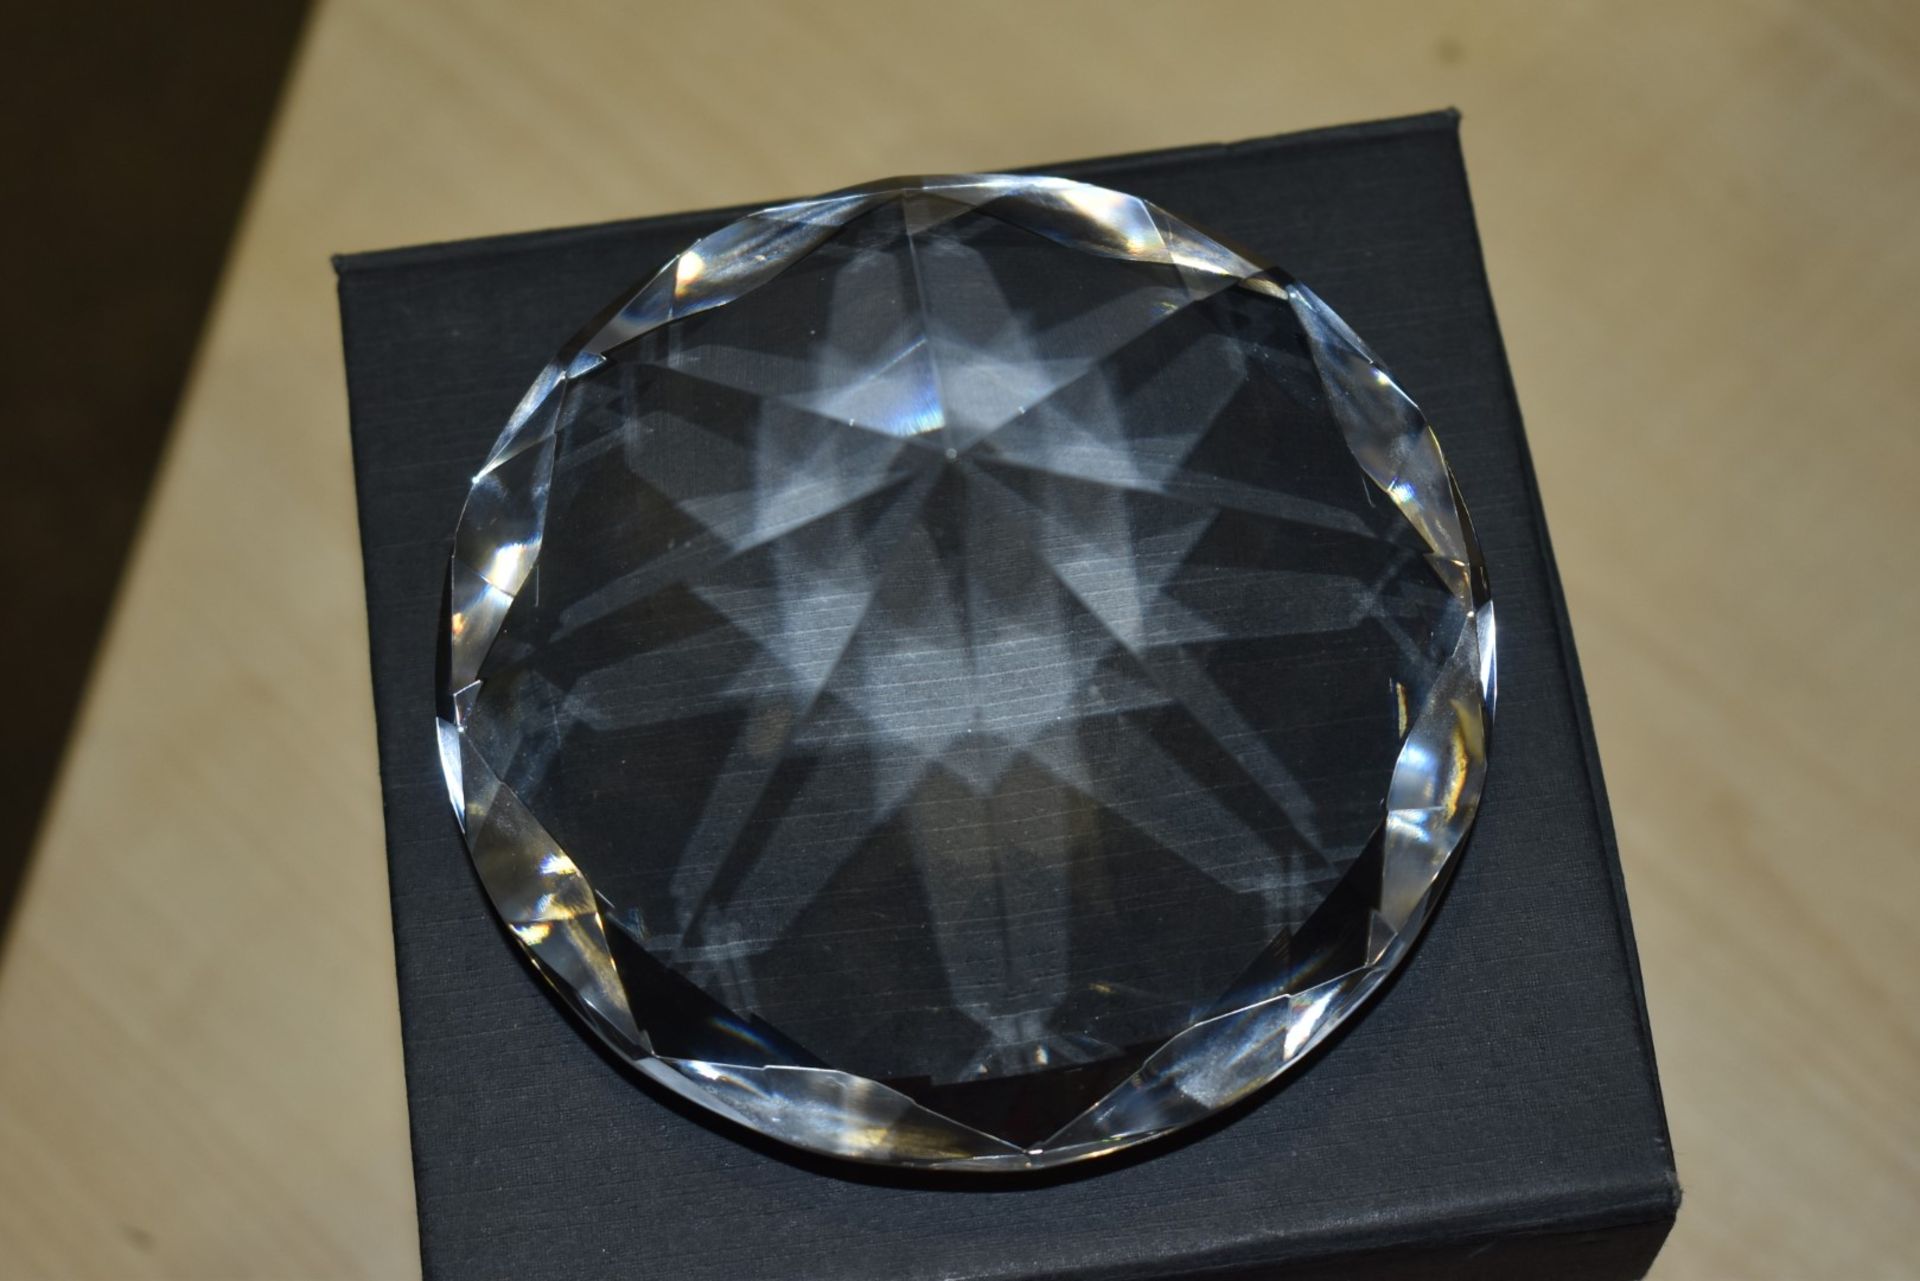 3 x Ice London Faux Diamond Paperweights - New and Boxed - Ref: In2128 wh1 pal1 - CL011 - - Image 6 of 8